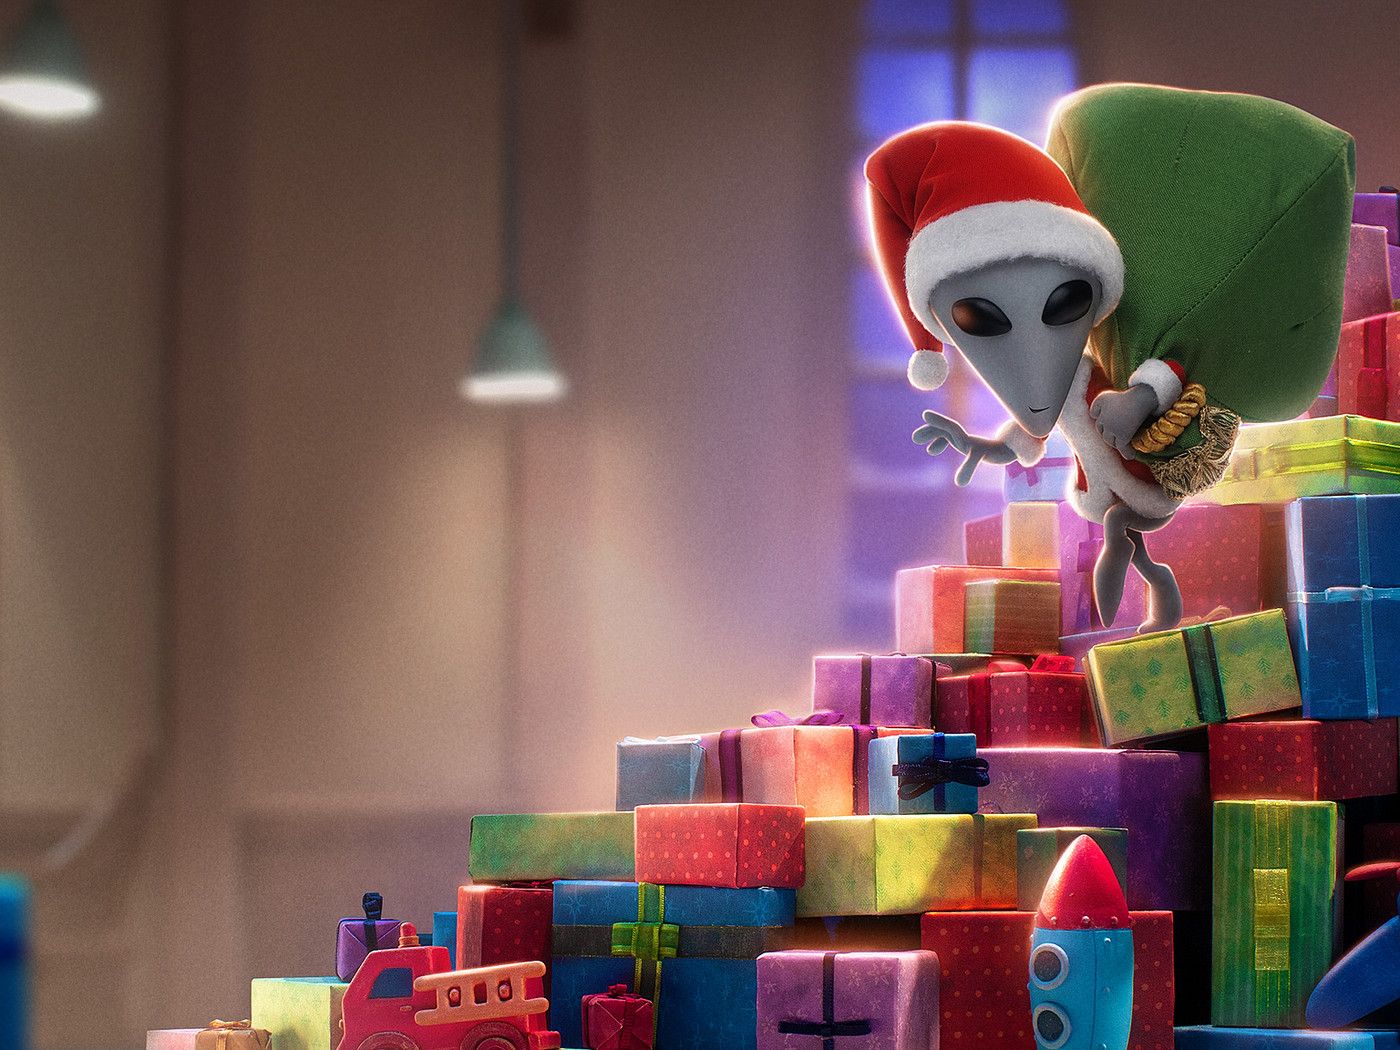 Alien Xmas Review: Netflix's Stop Motion Christmas Special Is Quite Grinchy